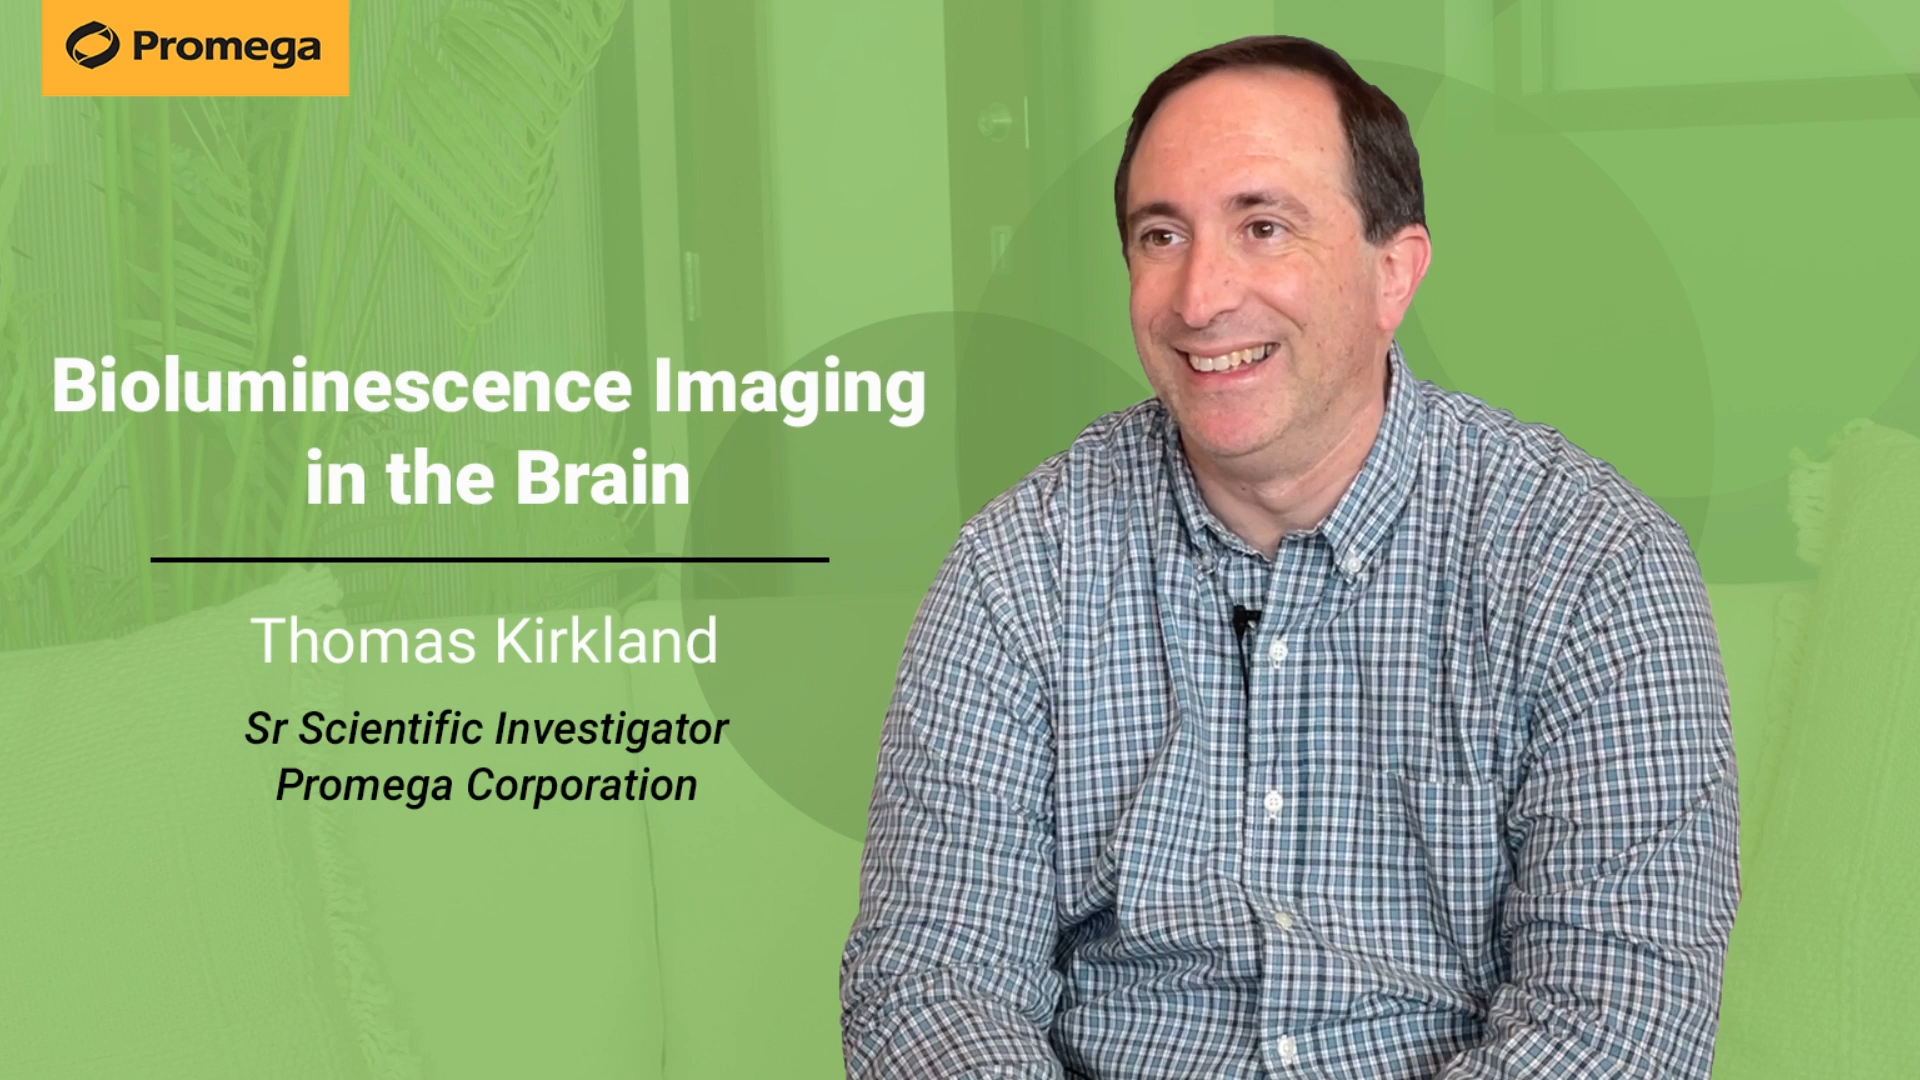 Promega scientist Thomas Kirkland discusses his recent publication in Nature Chemical Biology. The paper demonstrates a new substrate for NanoLuc luciferase that enables bioluminescence imaging of the brain.